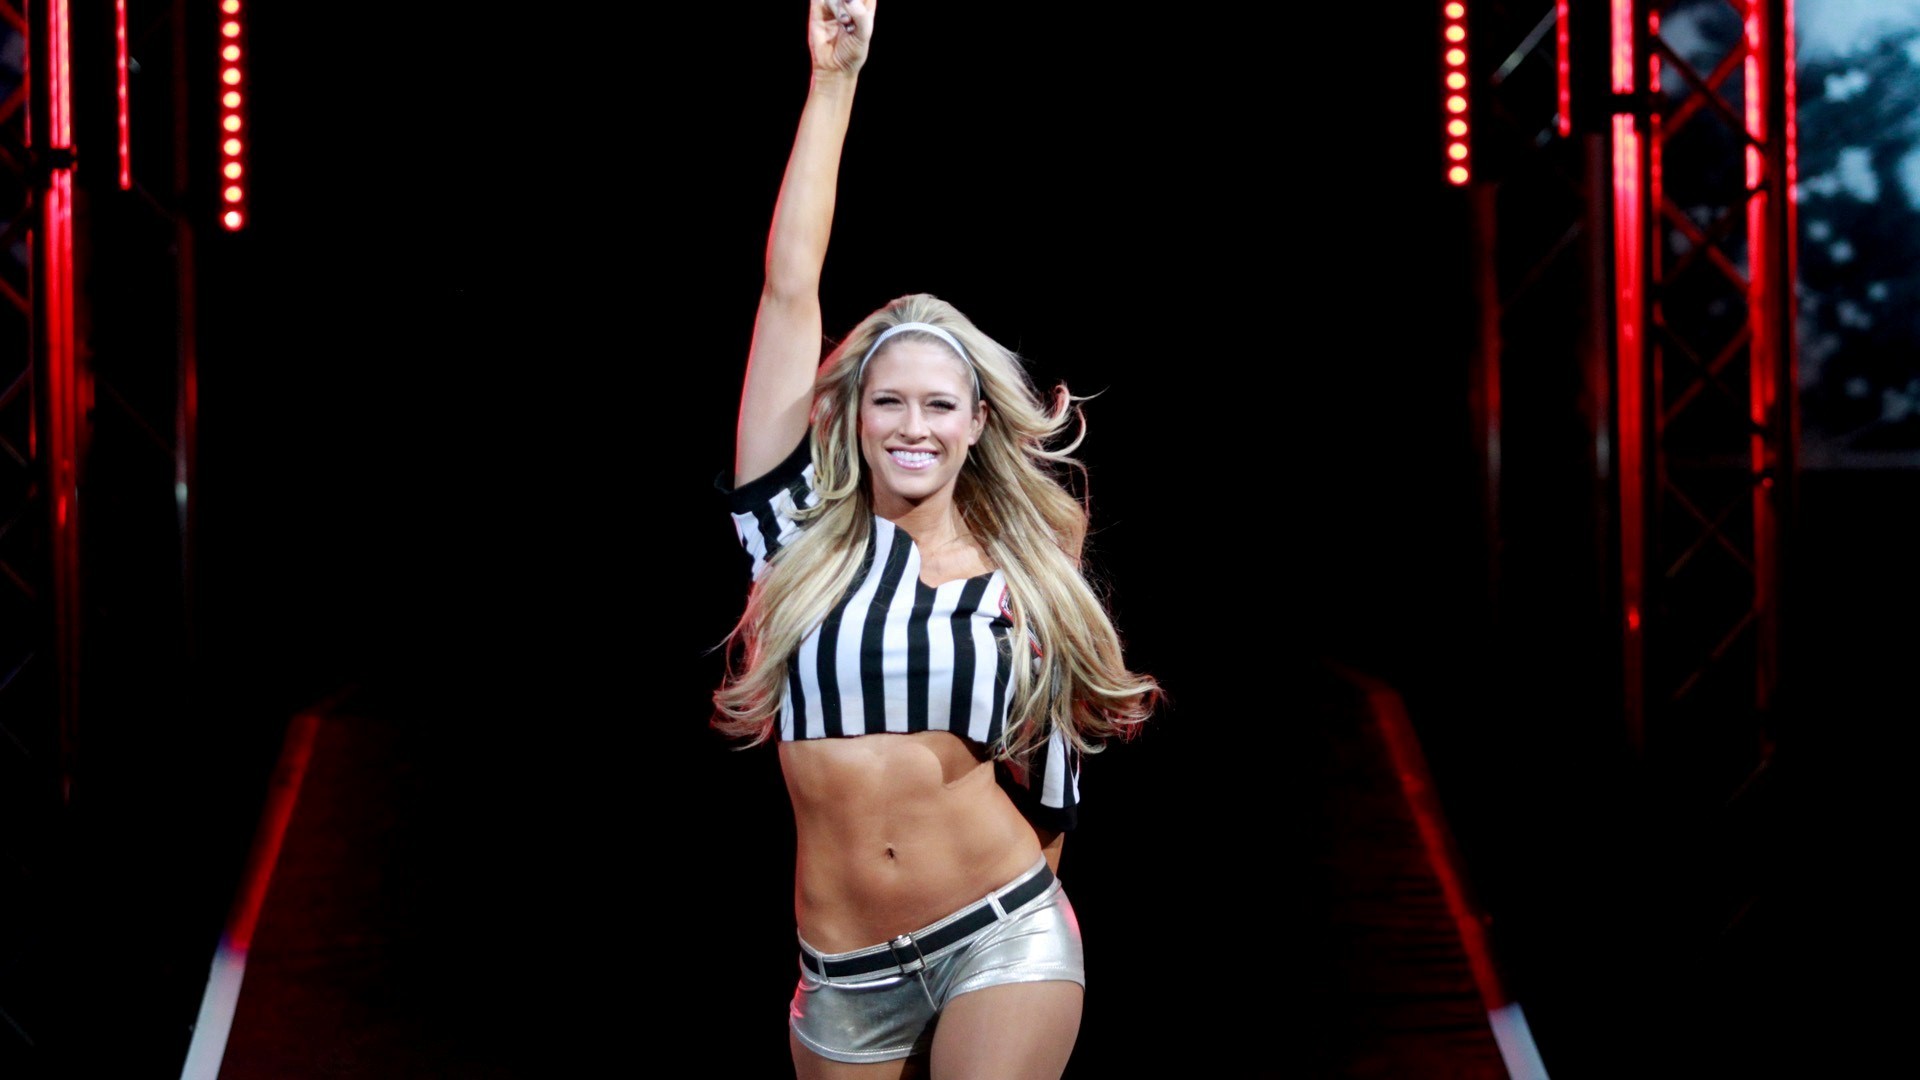 1920x1080 Kelly Kelly HD Images 4 | Kelly Kelly HD Images | Pinterest | Hd images and  Barbie blank